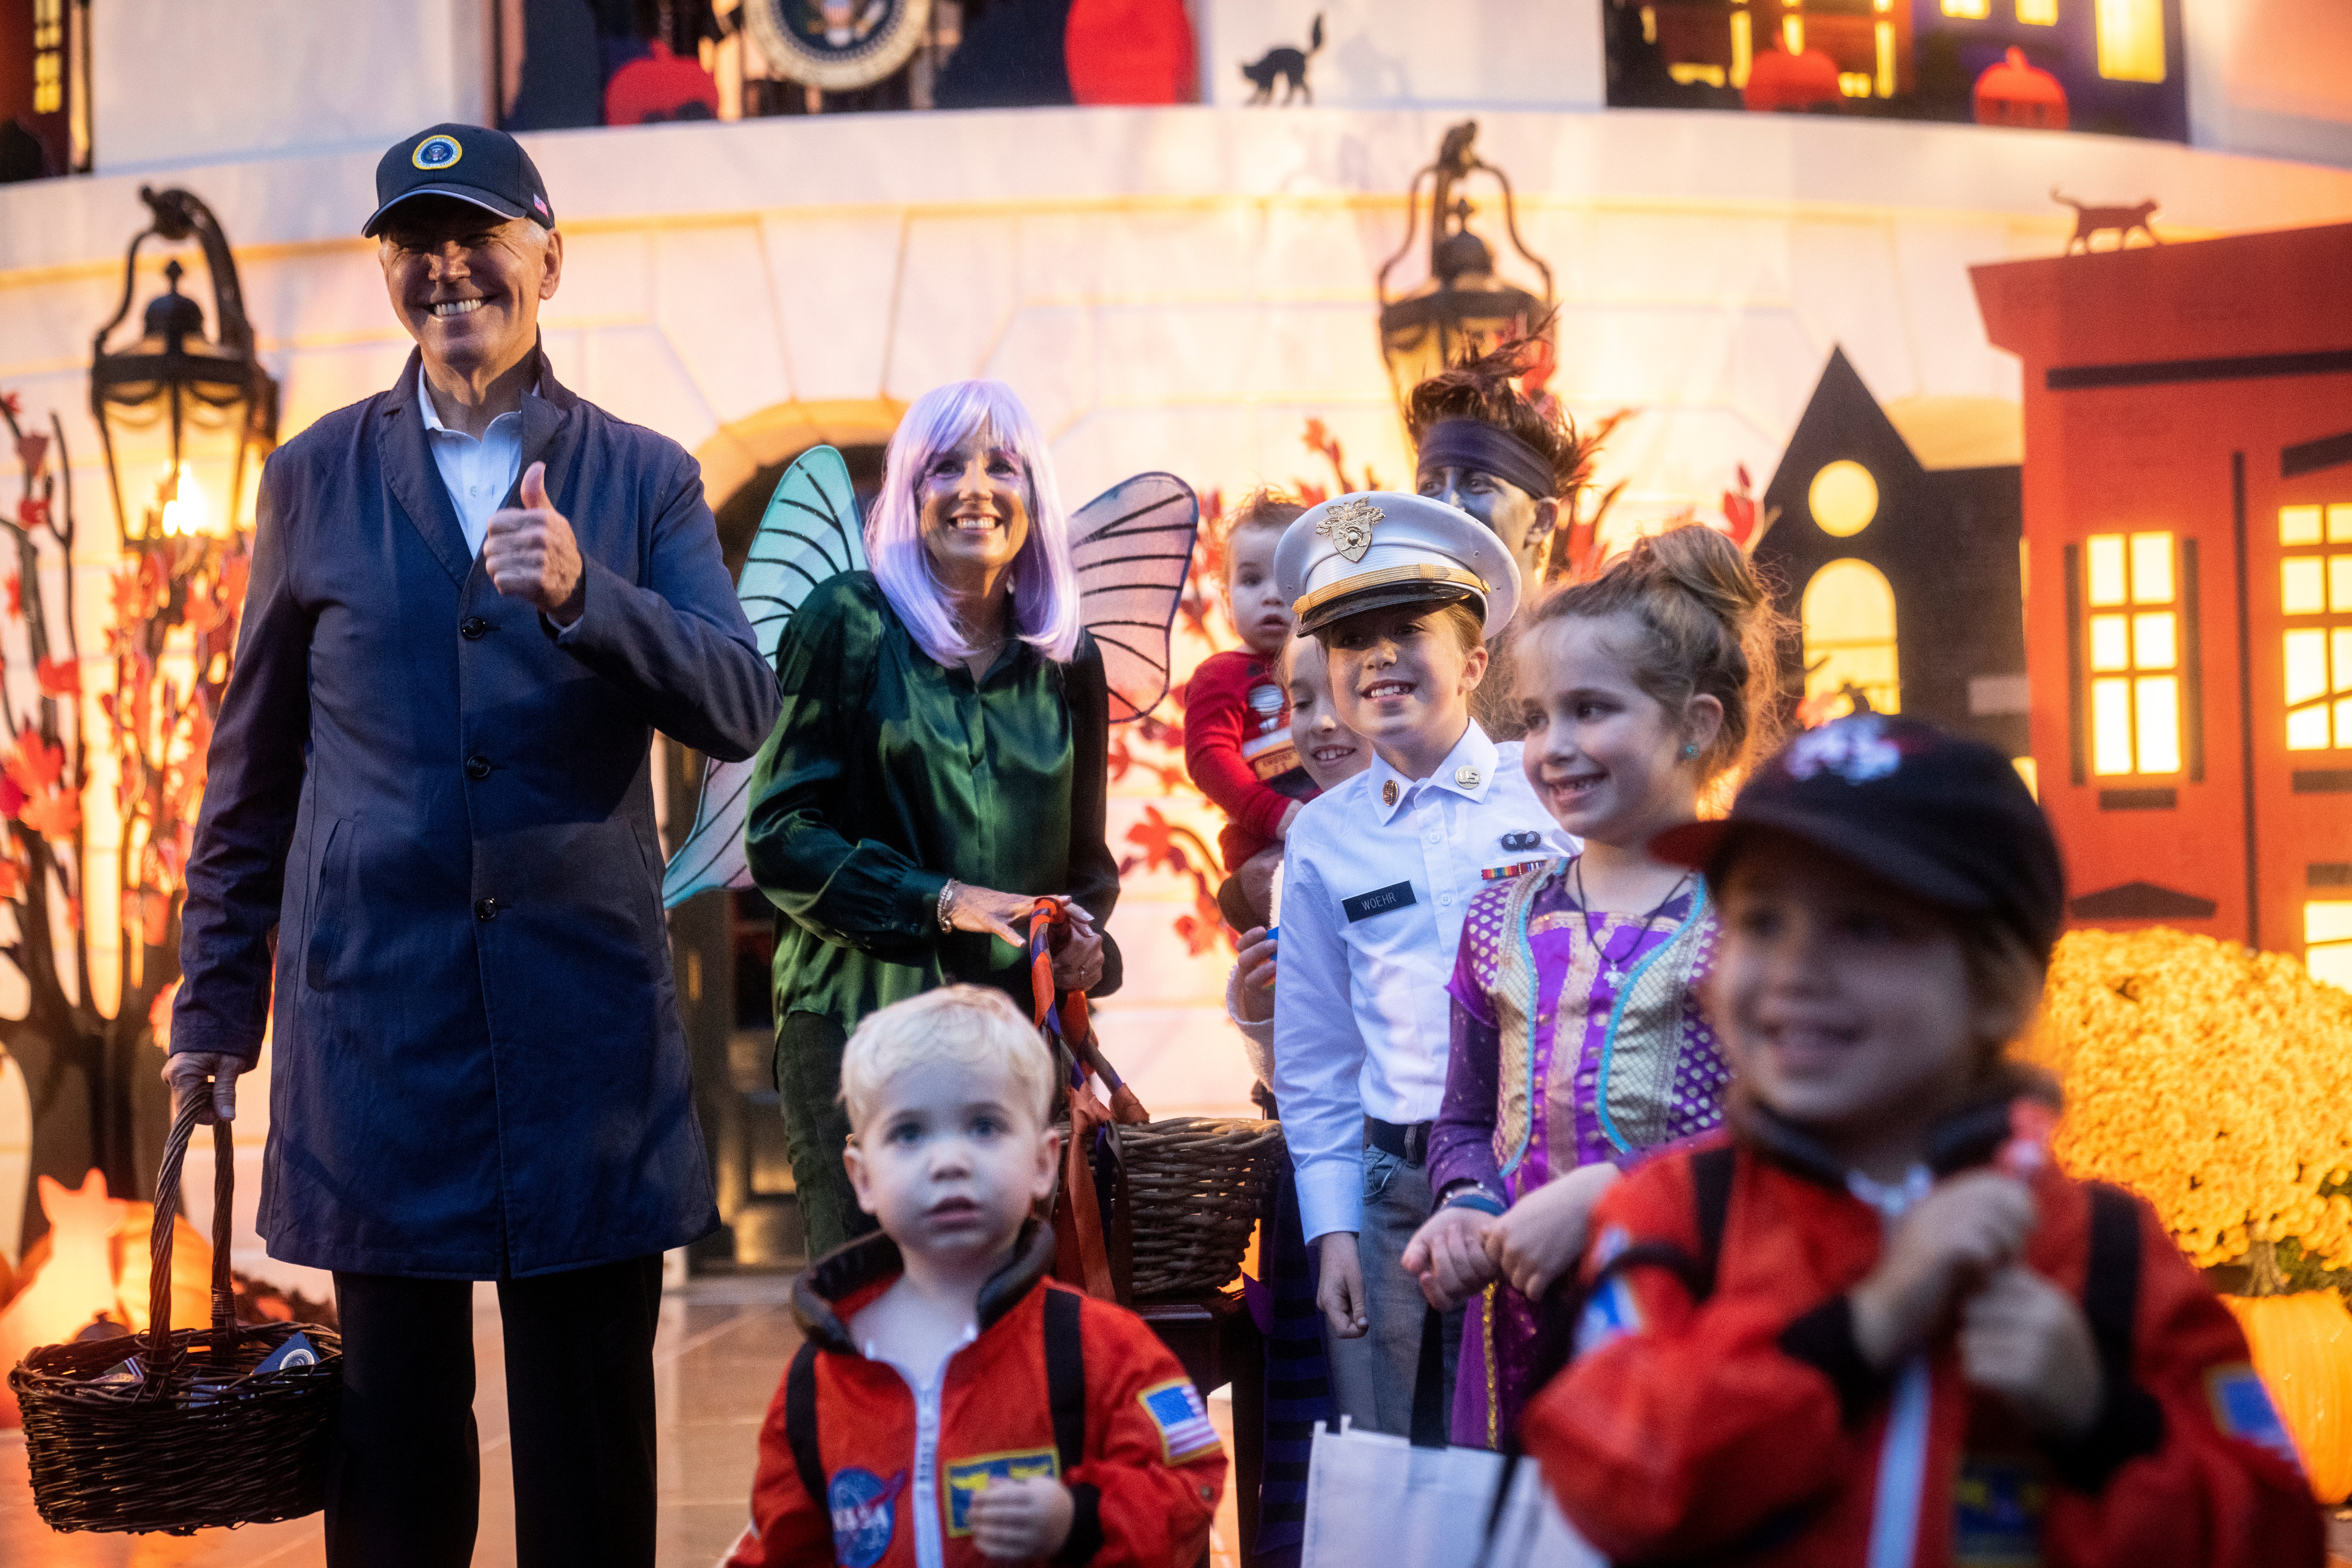 U.S. President Joe Biden and first lady Jill Biden greet trick-or-treaters during a Halloween event on the South Lawn of the White House October 31, 2022 in Washington, DC